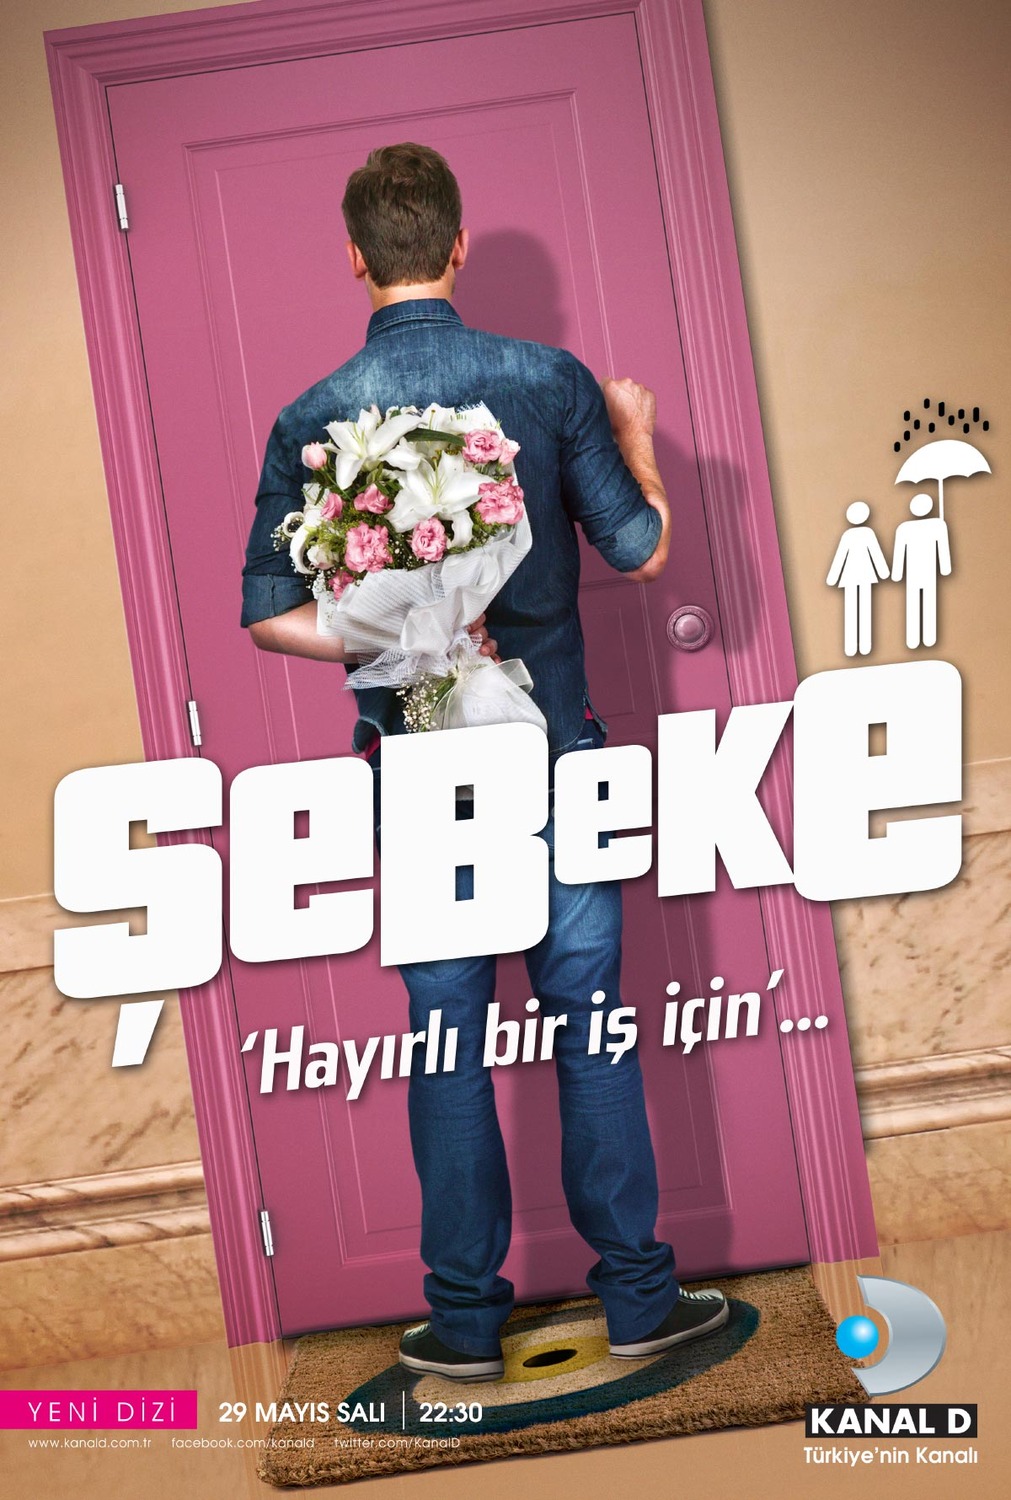 Extra Large TV Poster Image for Sebeke 